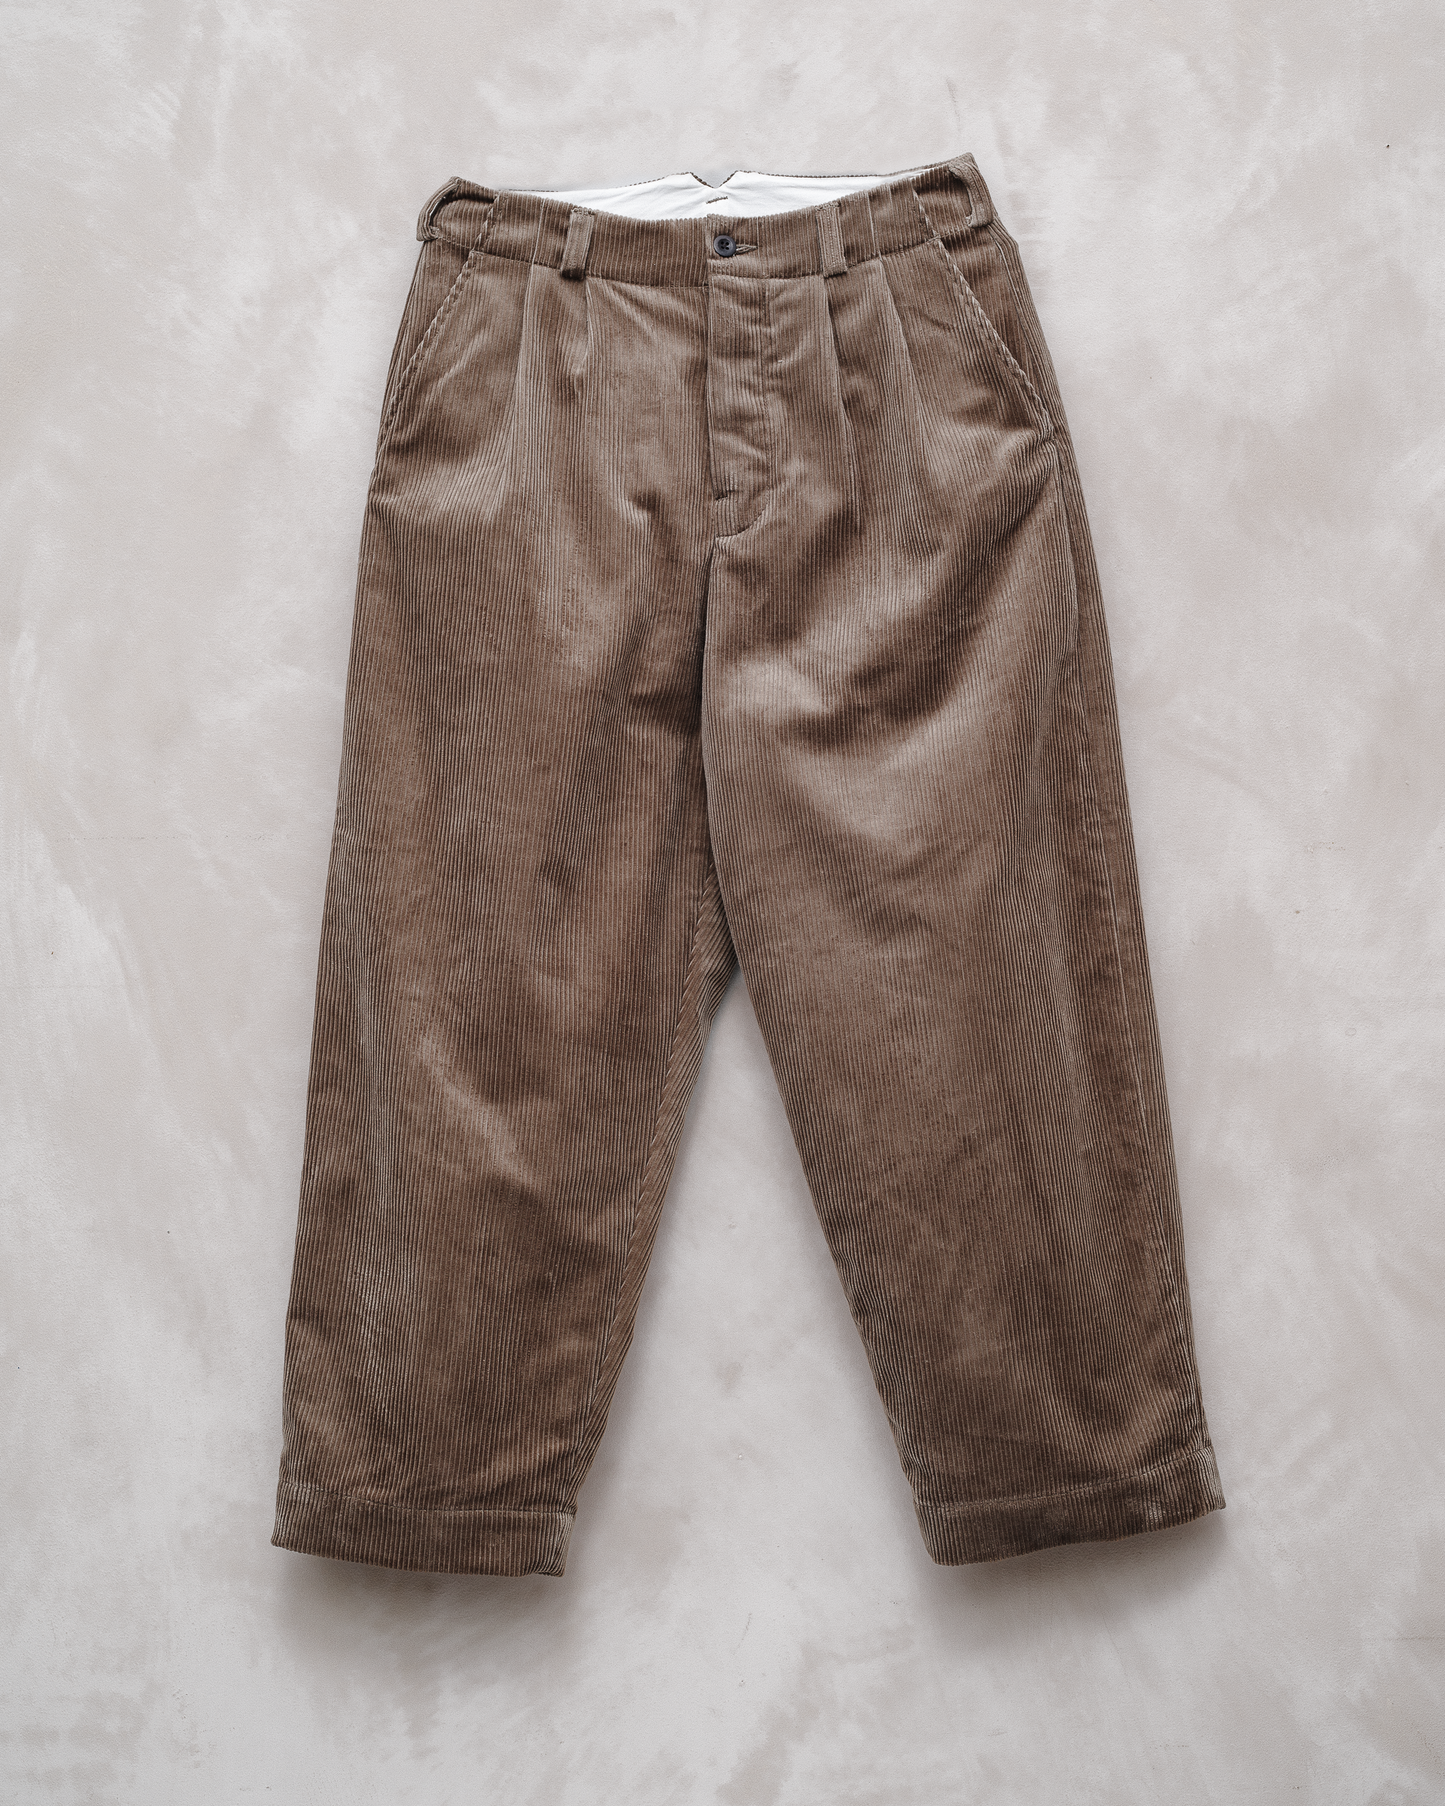 Two Pleat Pant - Organic Cotton Wide Wale Cord